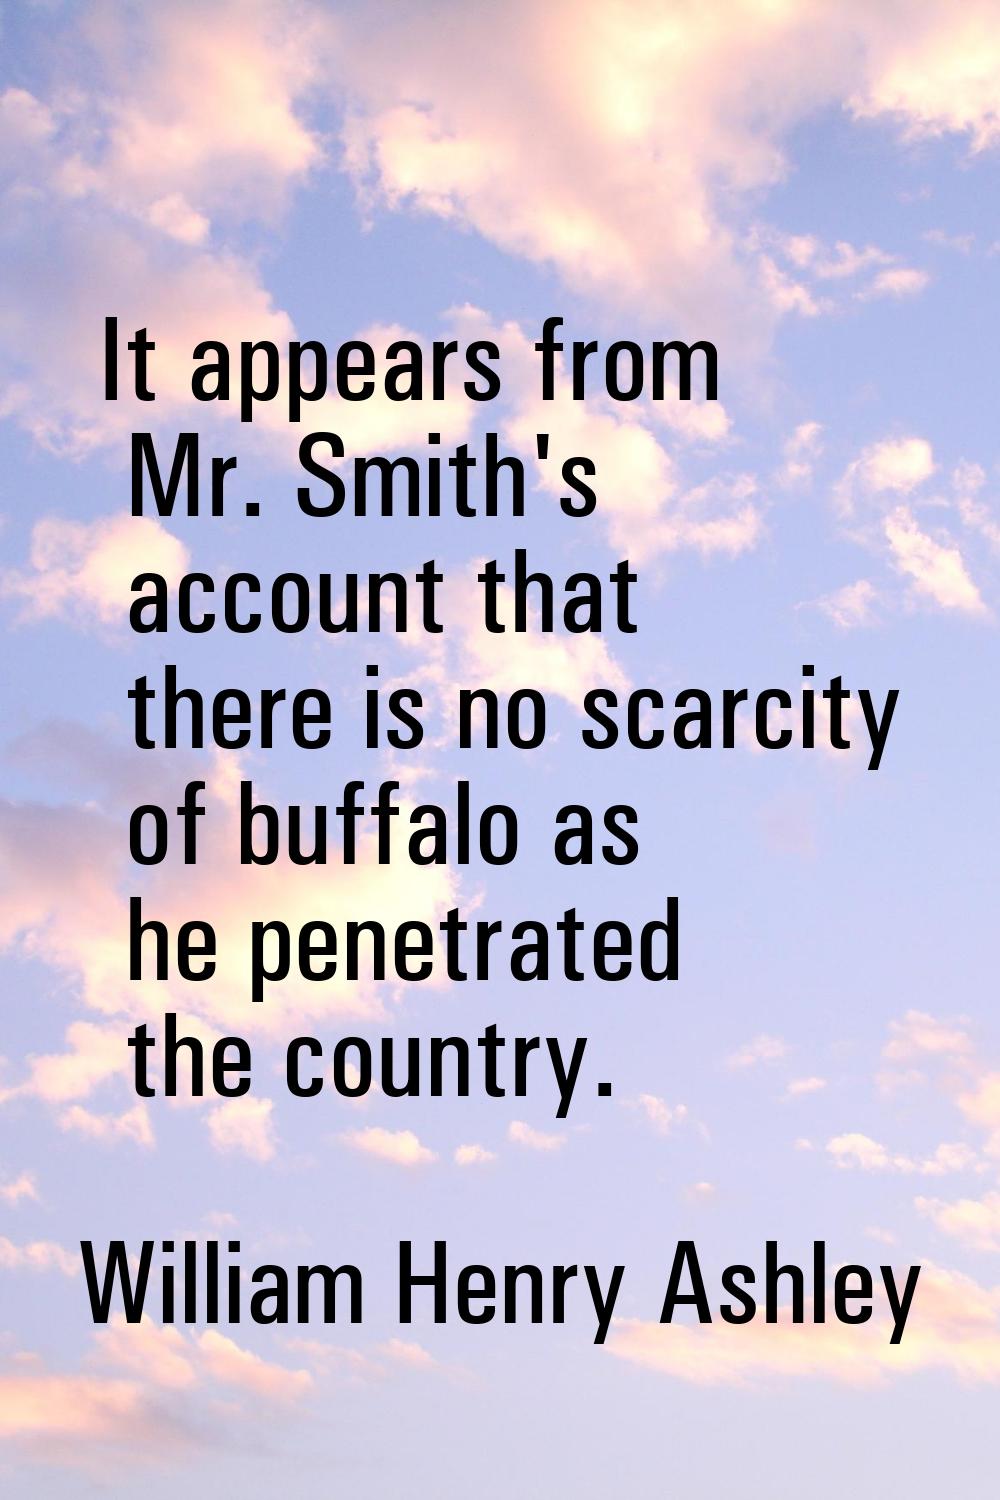 It appears from Mr. Smith's account that there is no scarcity of buffalo as he penetrated the count